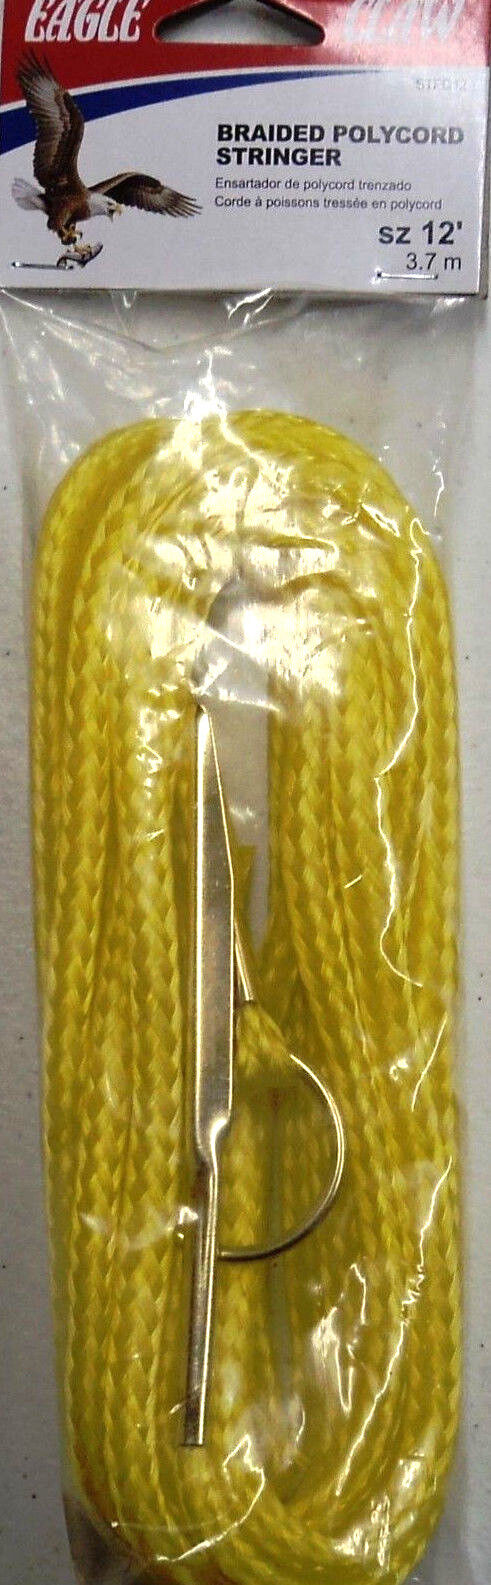 Eagle Claw 12' Heavy Duty Stringer - Two Packs - Yellow Braided Polycord #stpd12